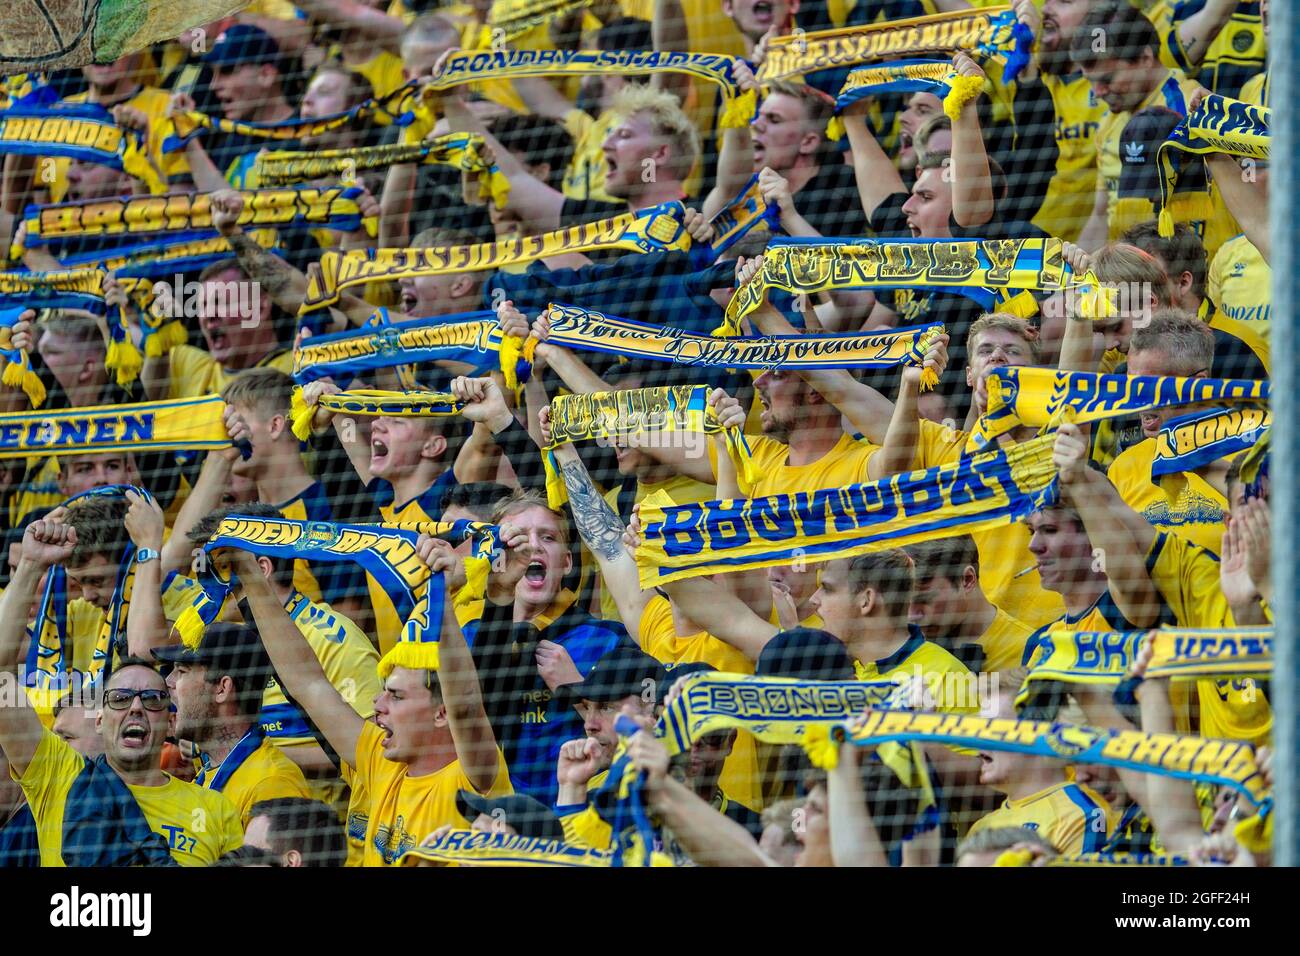 Odense, Denmark. 21st, August 2021. Football fans of IF seen in the away section during the 3F Superliga match Odense Boldklub and Broendby IF at Nature Energy Park in Odense. (